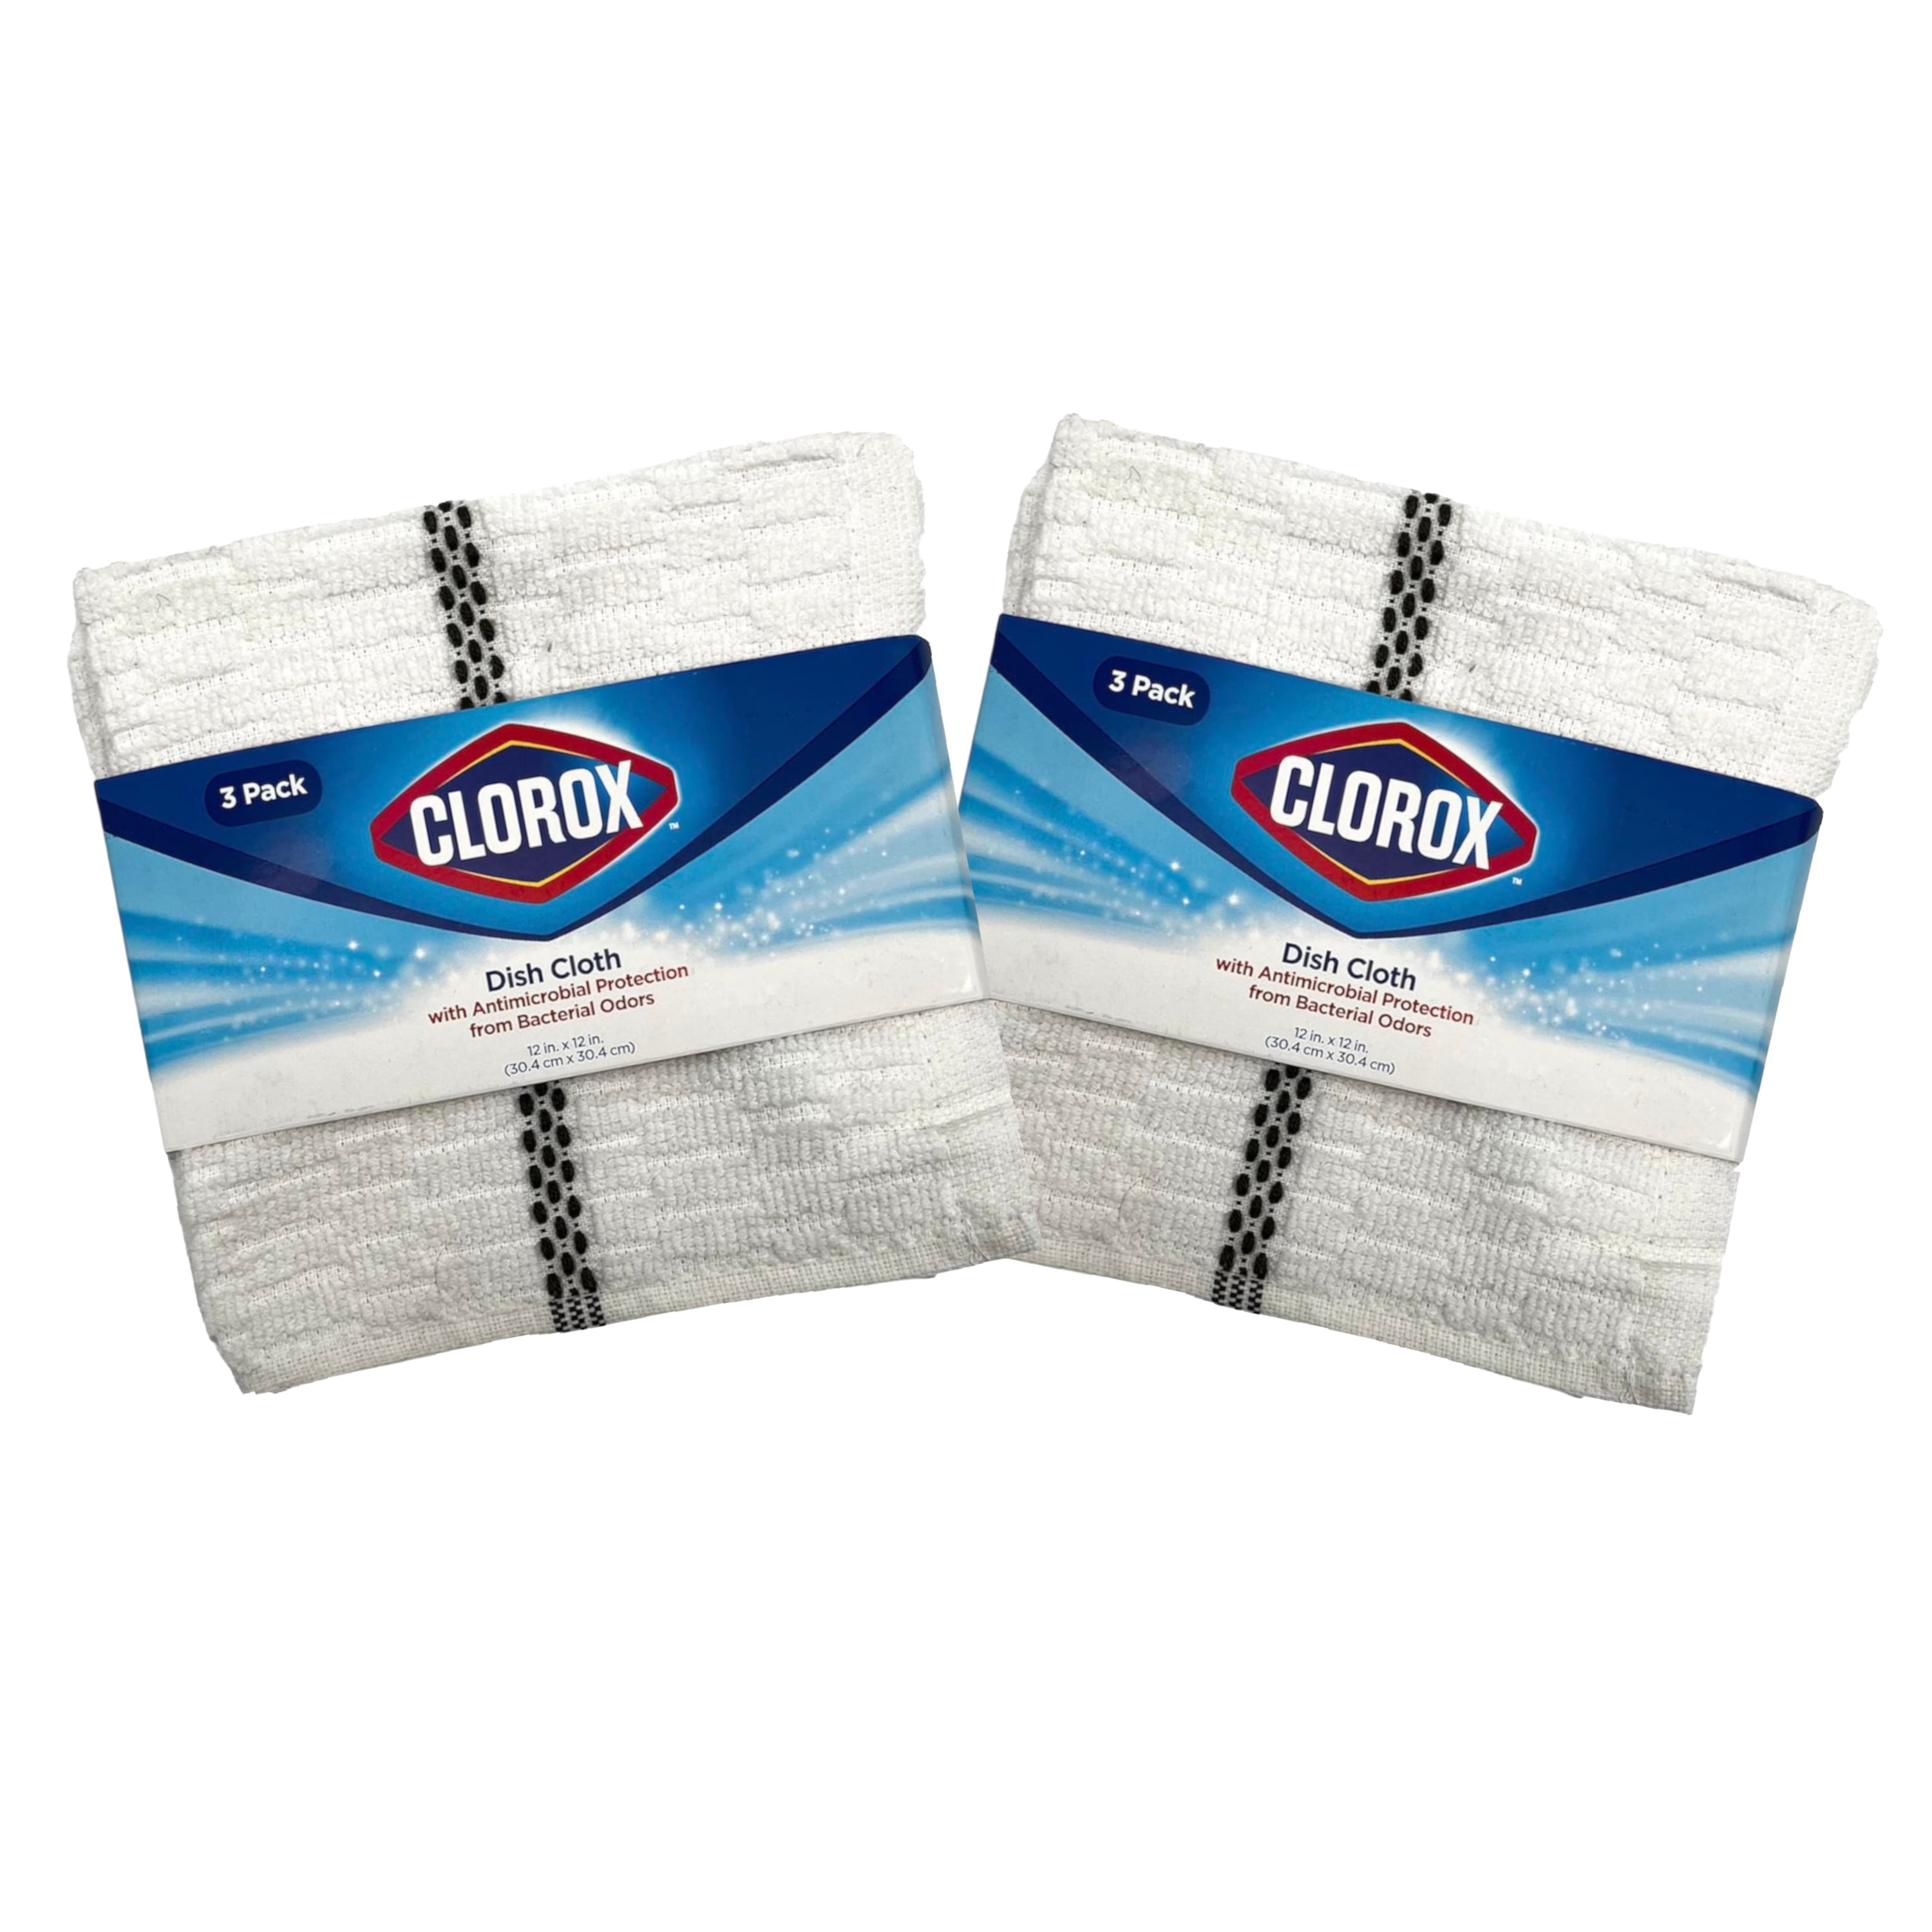 Clorox Dish Cloths - 6 Count (2 Packs of 3 Cloths), White With Grey Stripe